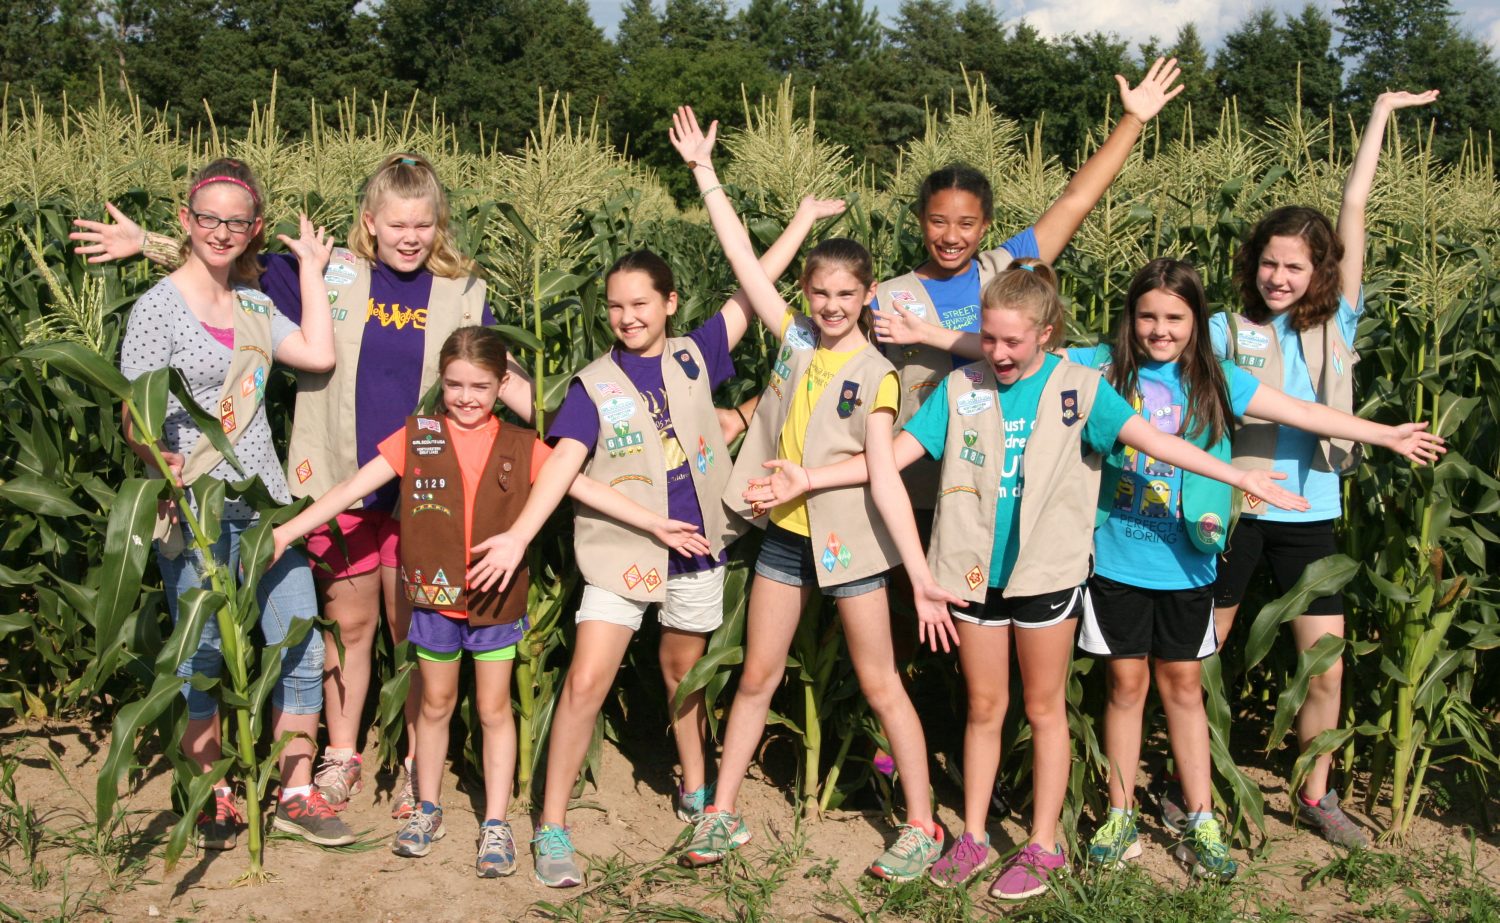 Members of Girl Scout Troop 6181 are (left to right) Kiarra Grosbier, Kylee Pankratz, Maddie Kloos, Emma Tarter, Allie Kloos, Ava Sainterme, Maren Hamill, Jackie Kloos, and Charlotte Johnson. Not pictured are members Kairi Kim and Cameron Gluege.